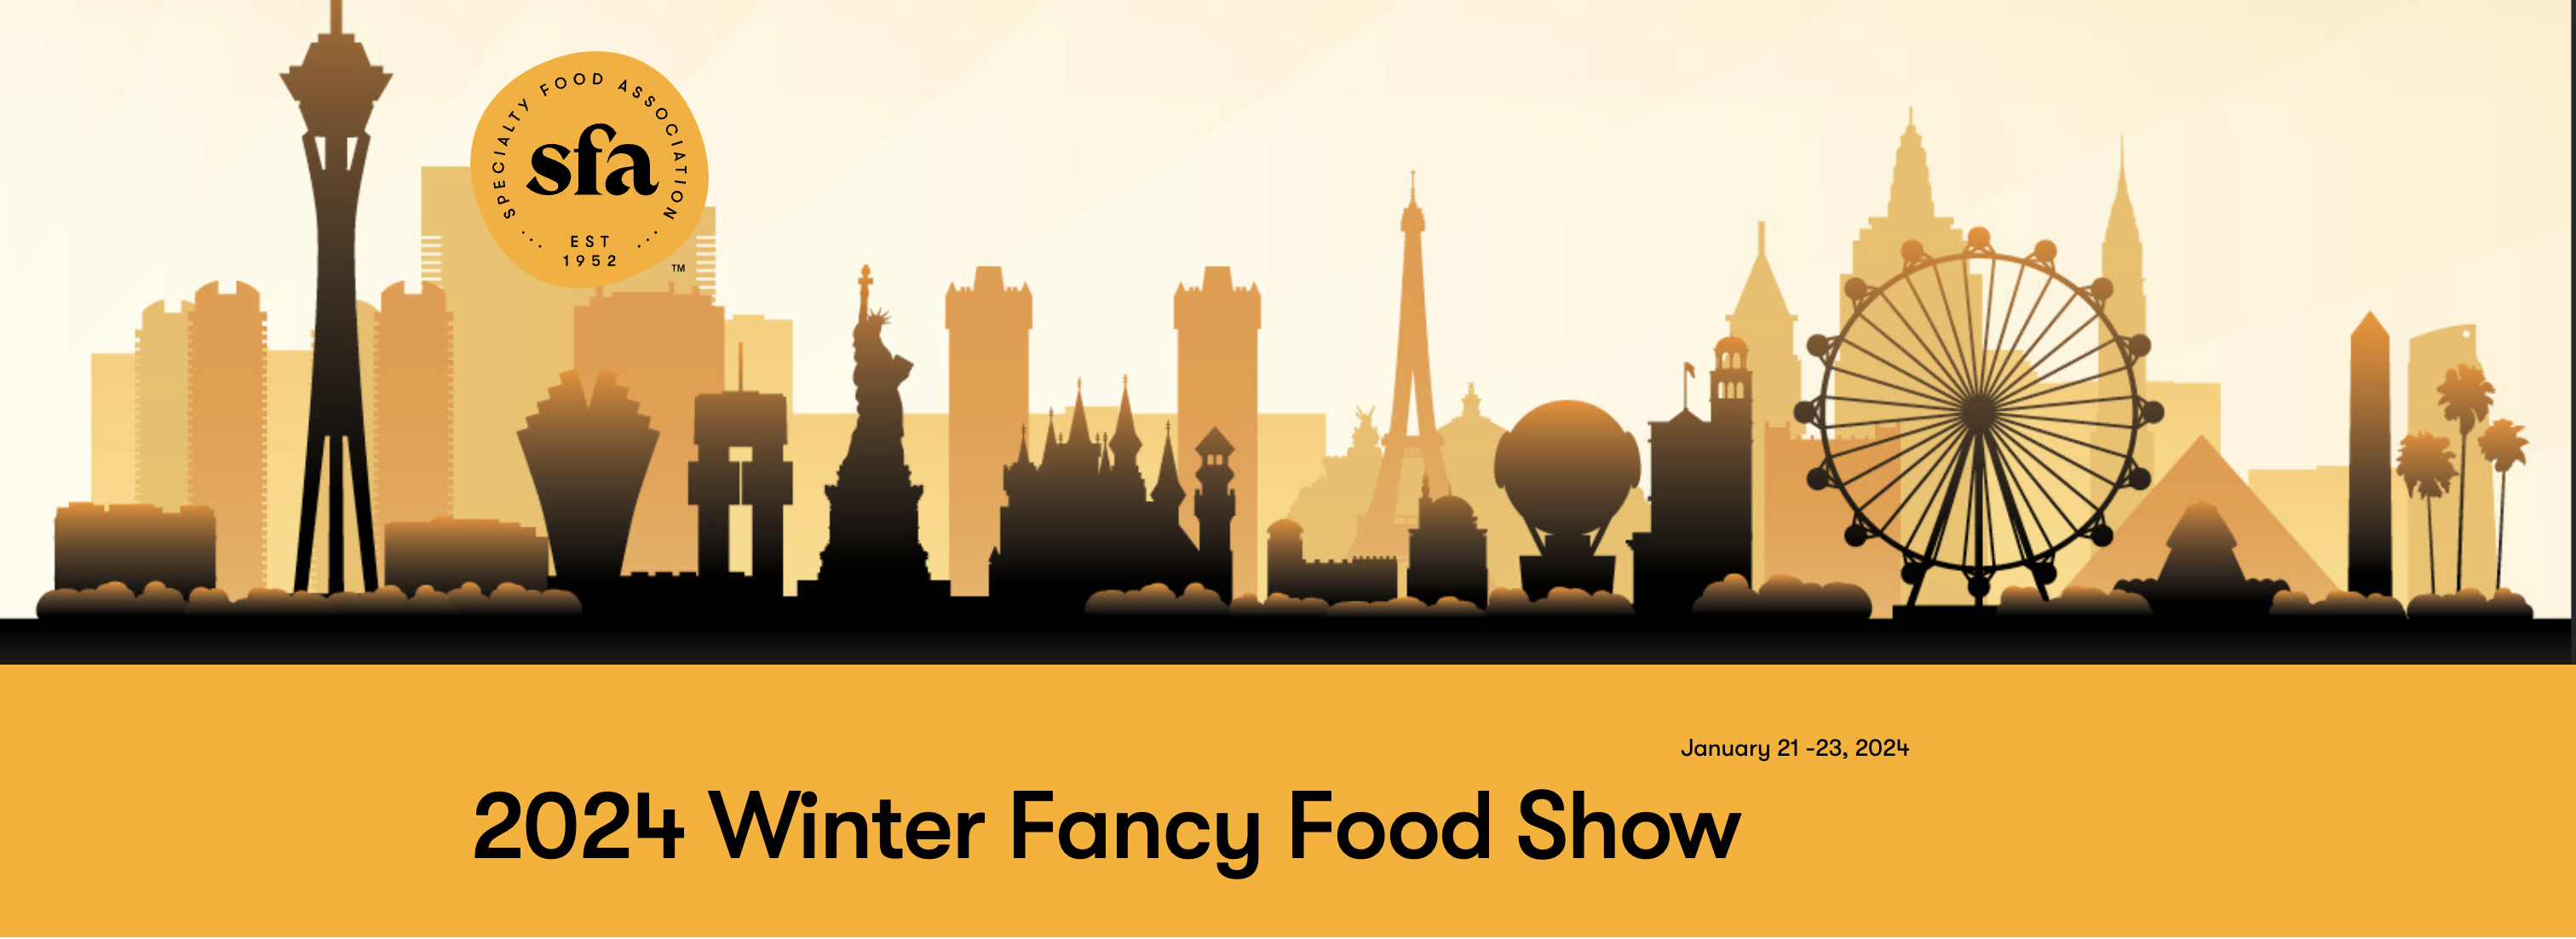 How to Prepare to Exhibit at the Fancy Food Show 2024